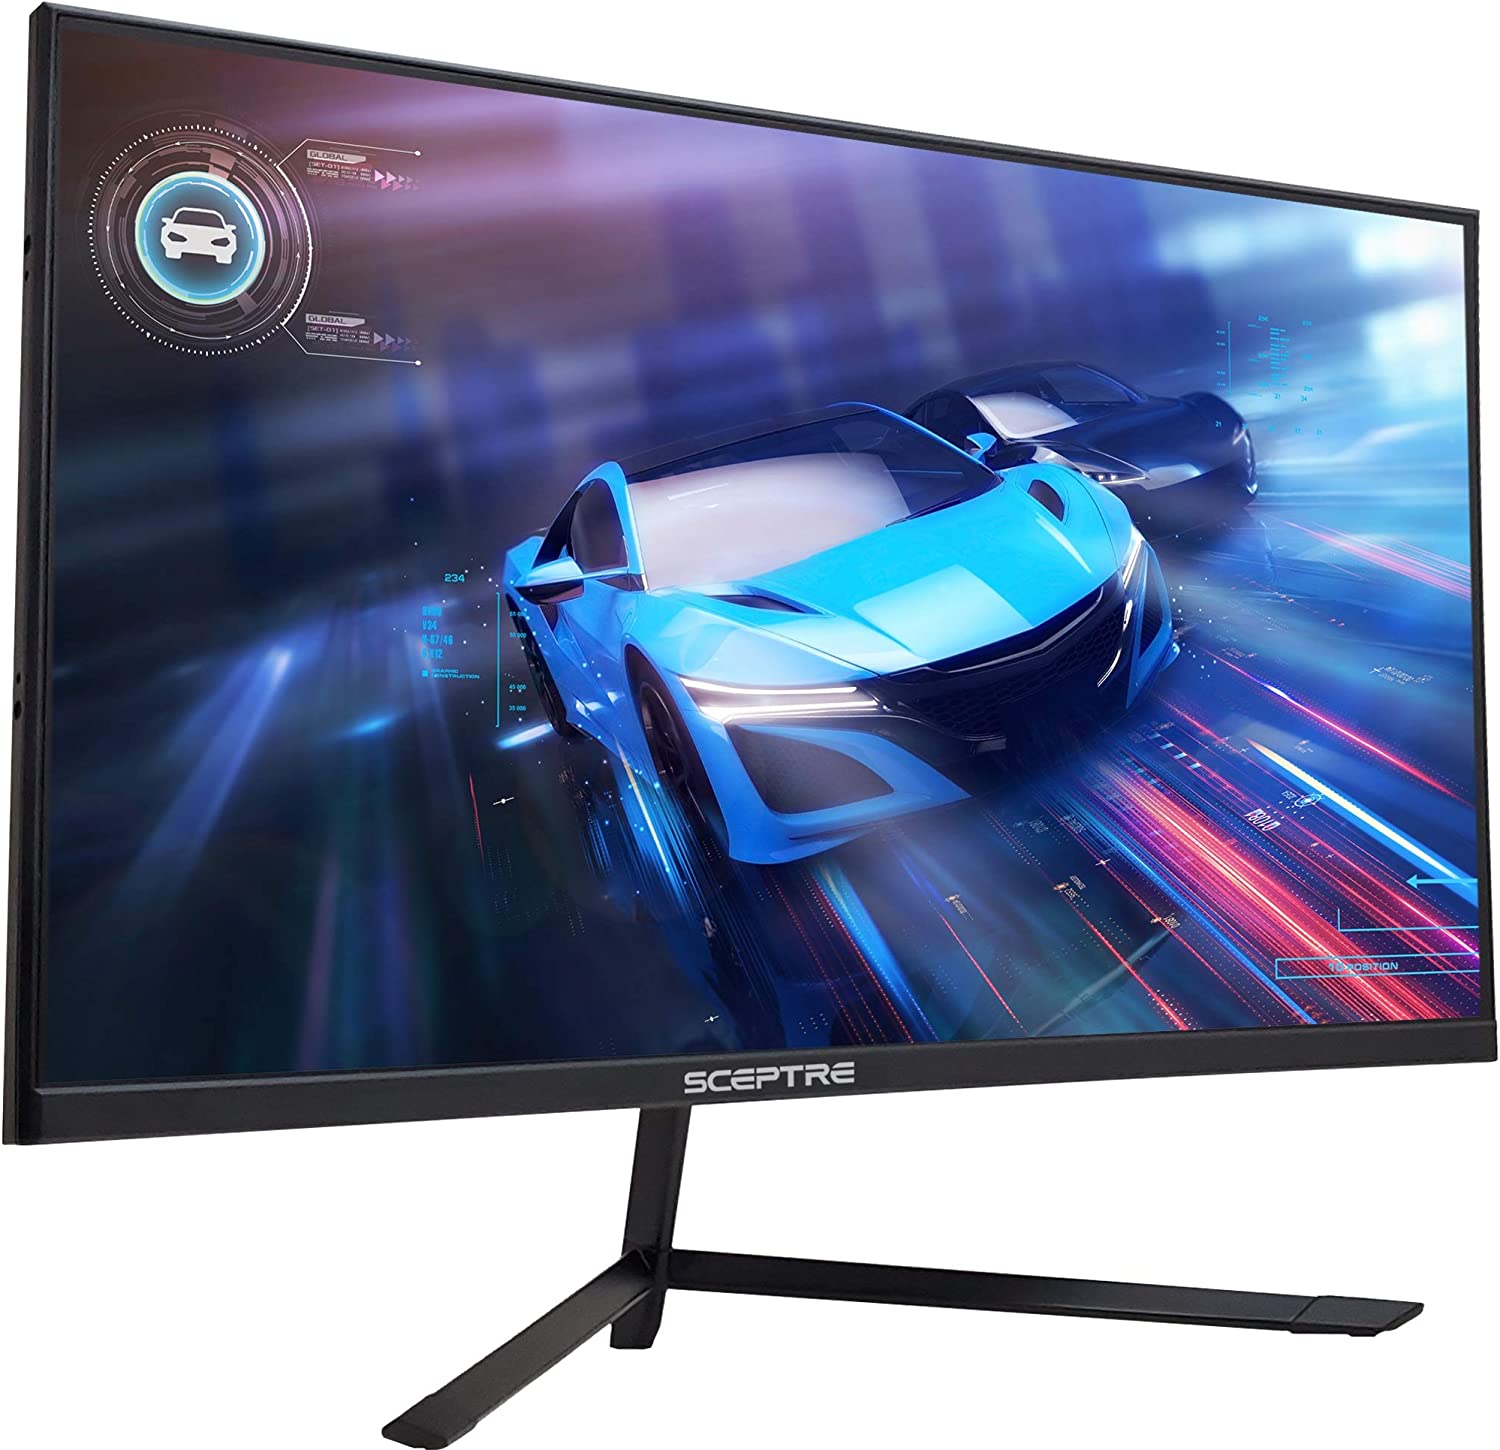 The Best 120hz Gaming Monitor: A Product Review